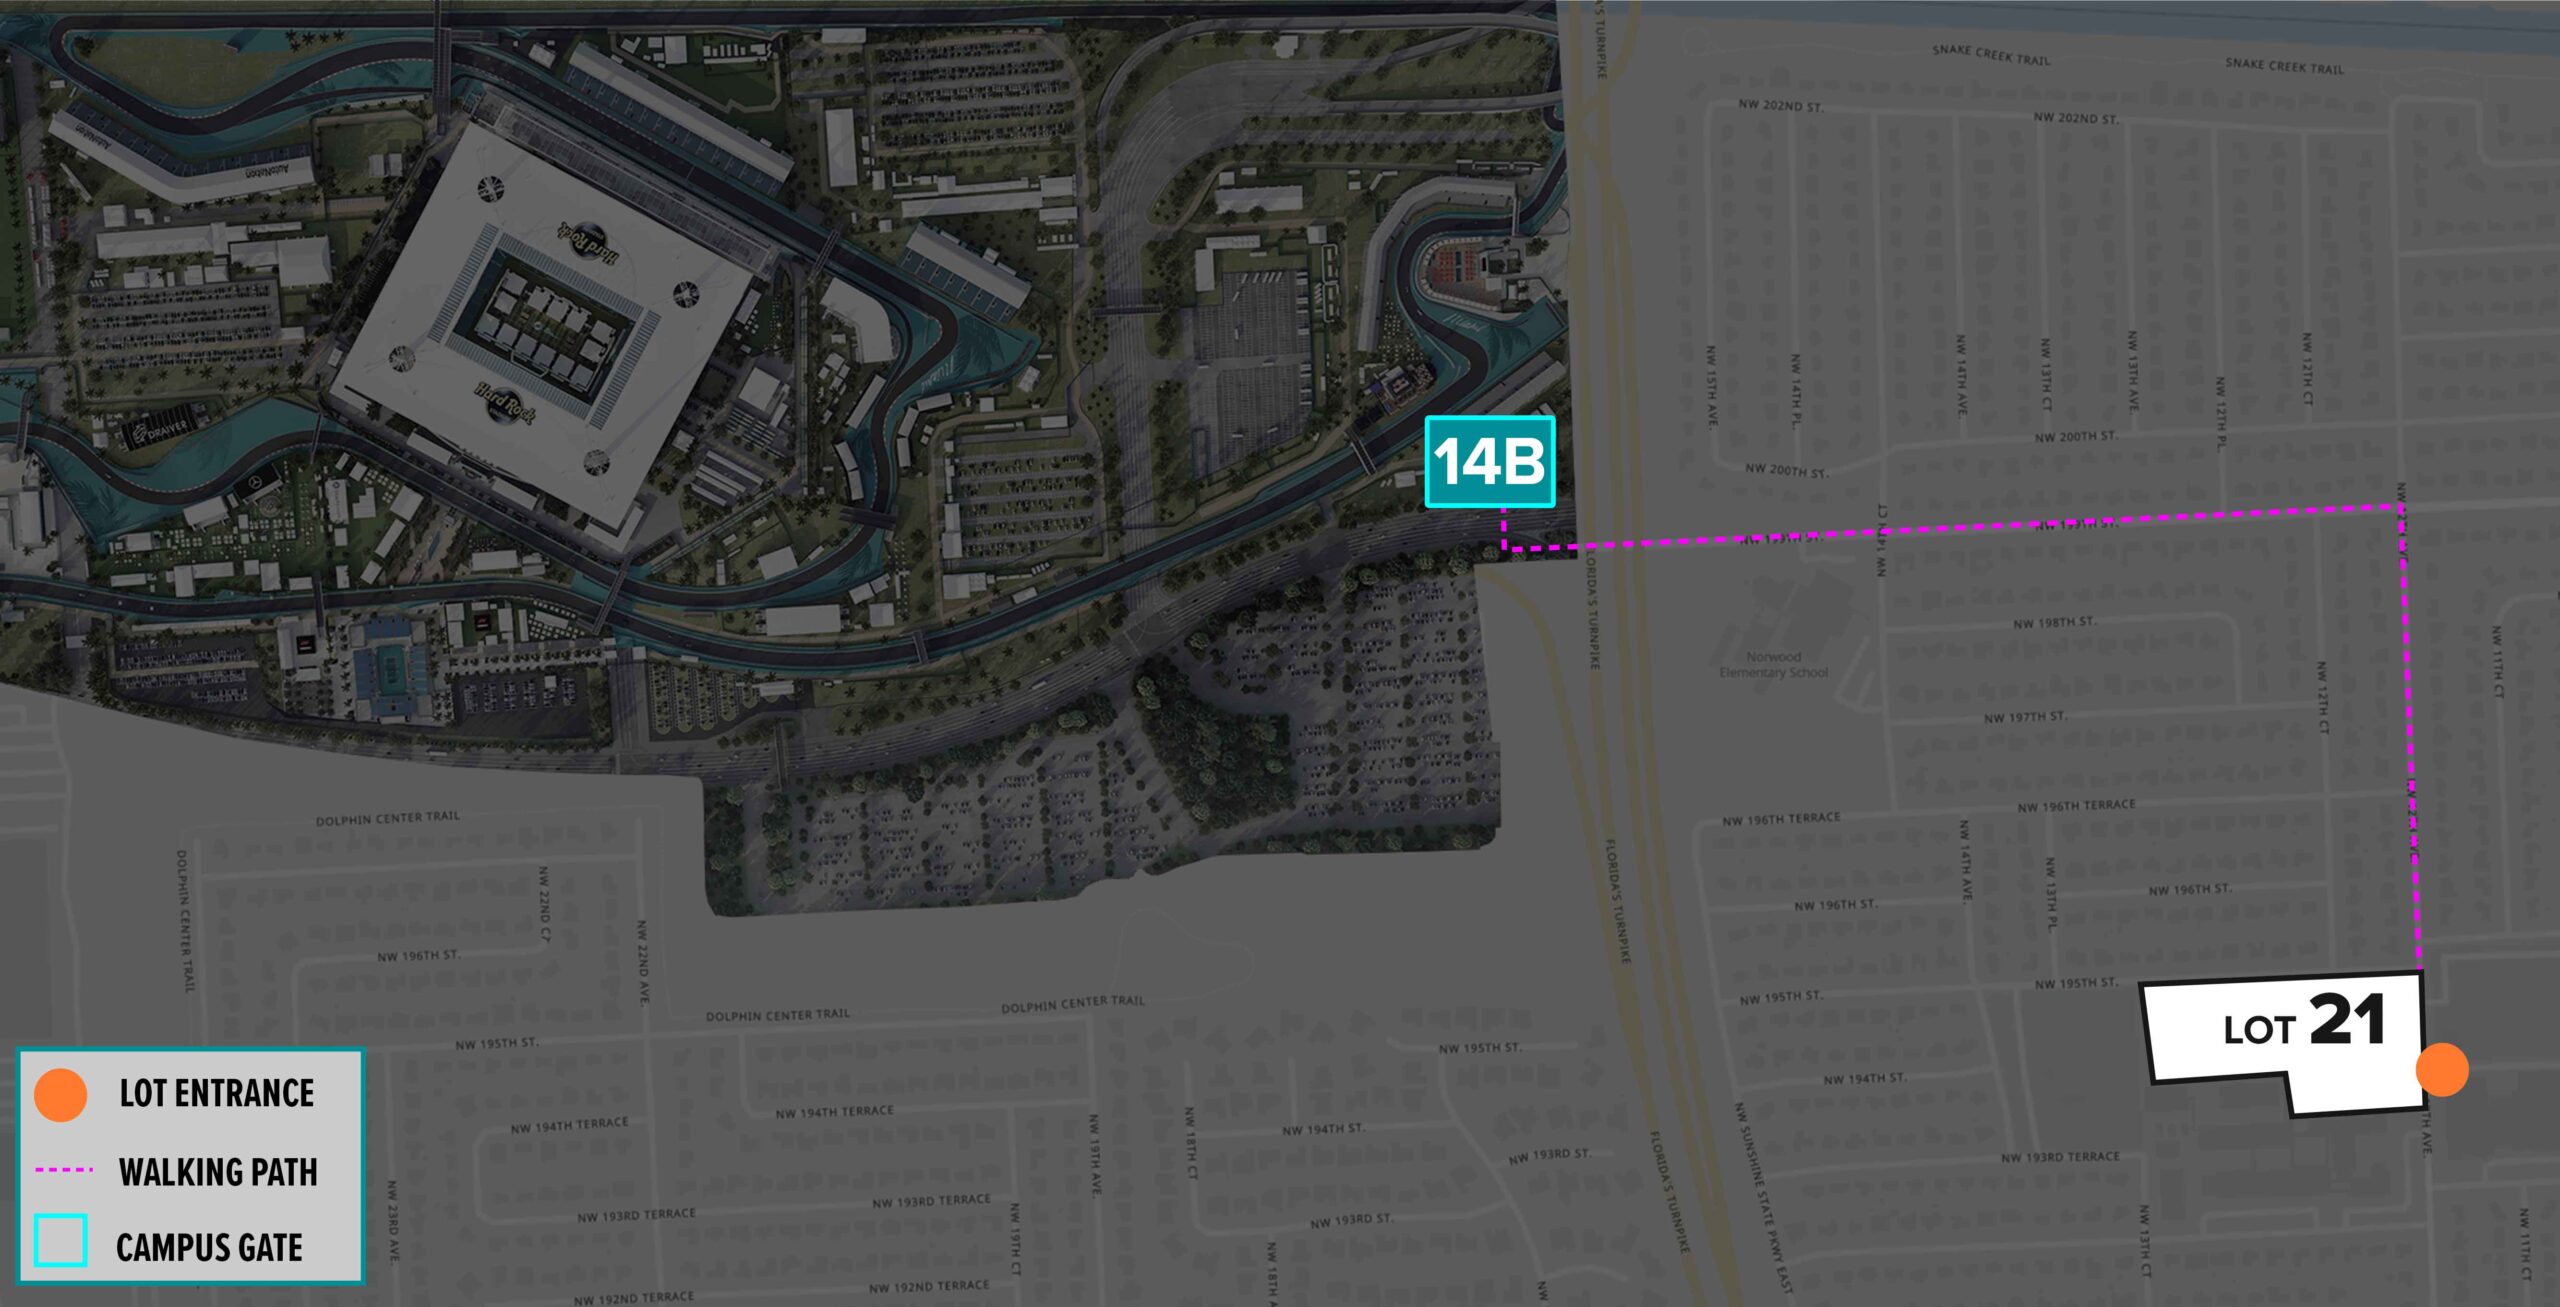 Parking Lot Location Map for White Lot 21 at the Formula 1 Crypto.com Miami Grand Prix